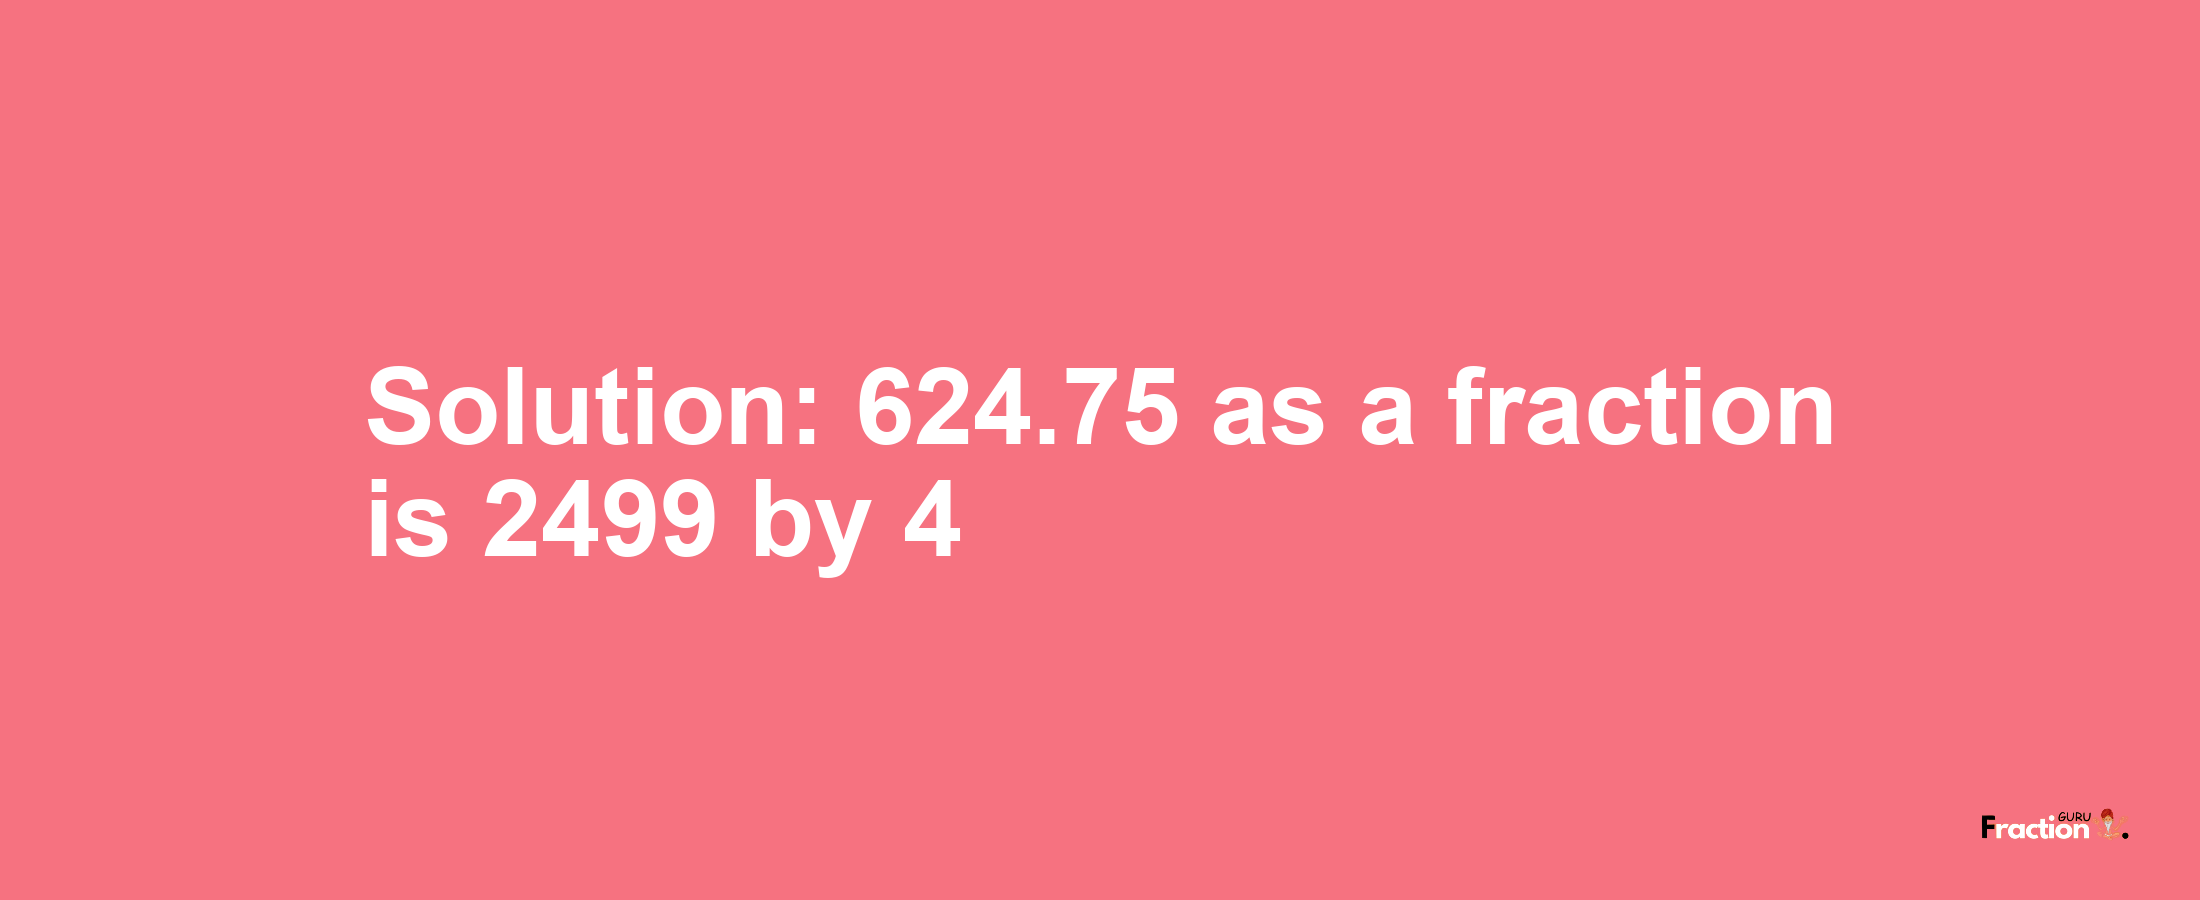 Solution:624.75 as a fraction is 2499/4